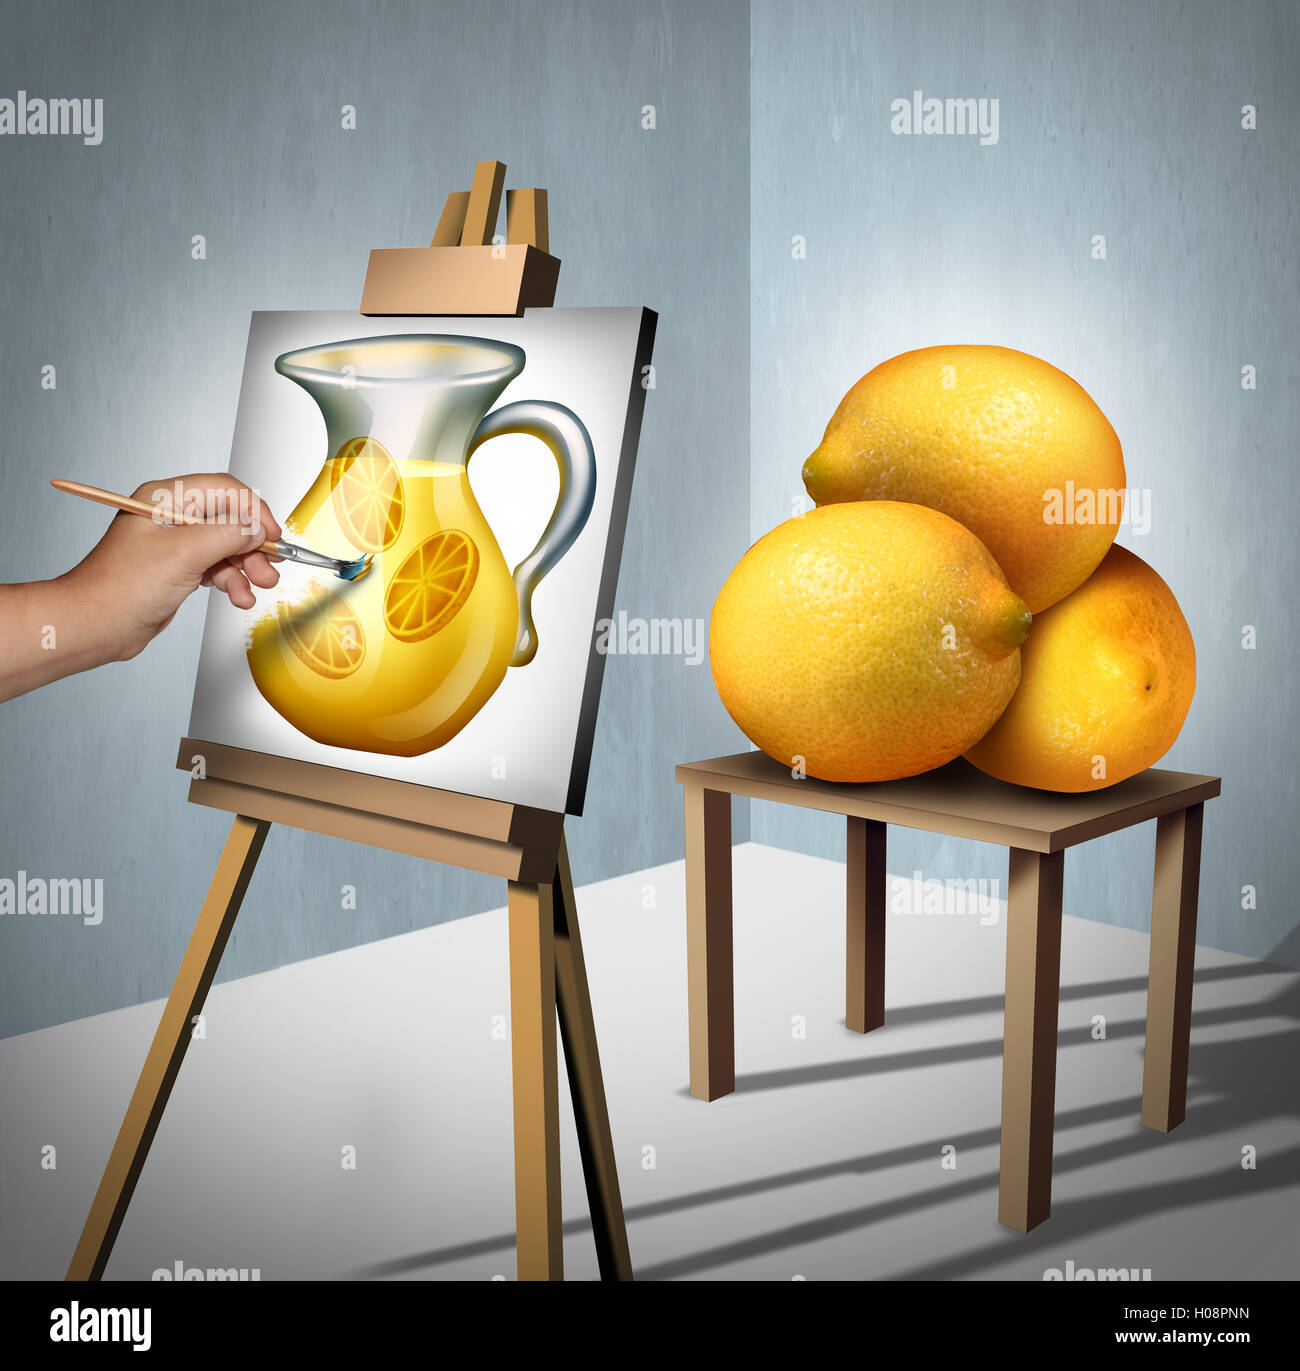 Make lemonade out of lemons positive motivational and inspirational quote symbol as a person interpreting a group of lemon fruits as a painting of a jug of lemonade as a concept fot optimism with 3D illustration elements. Stock Photo